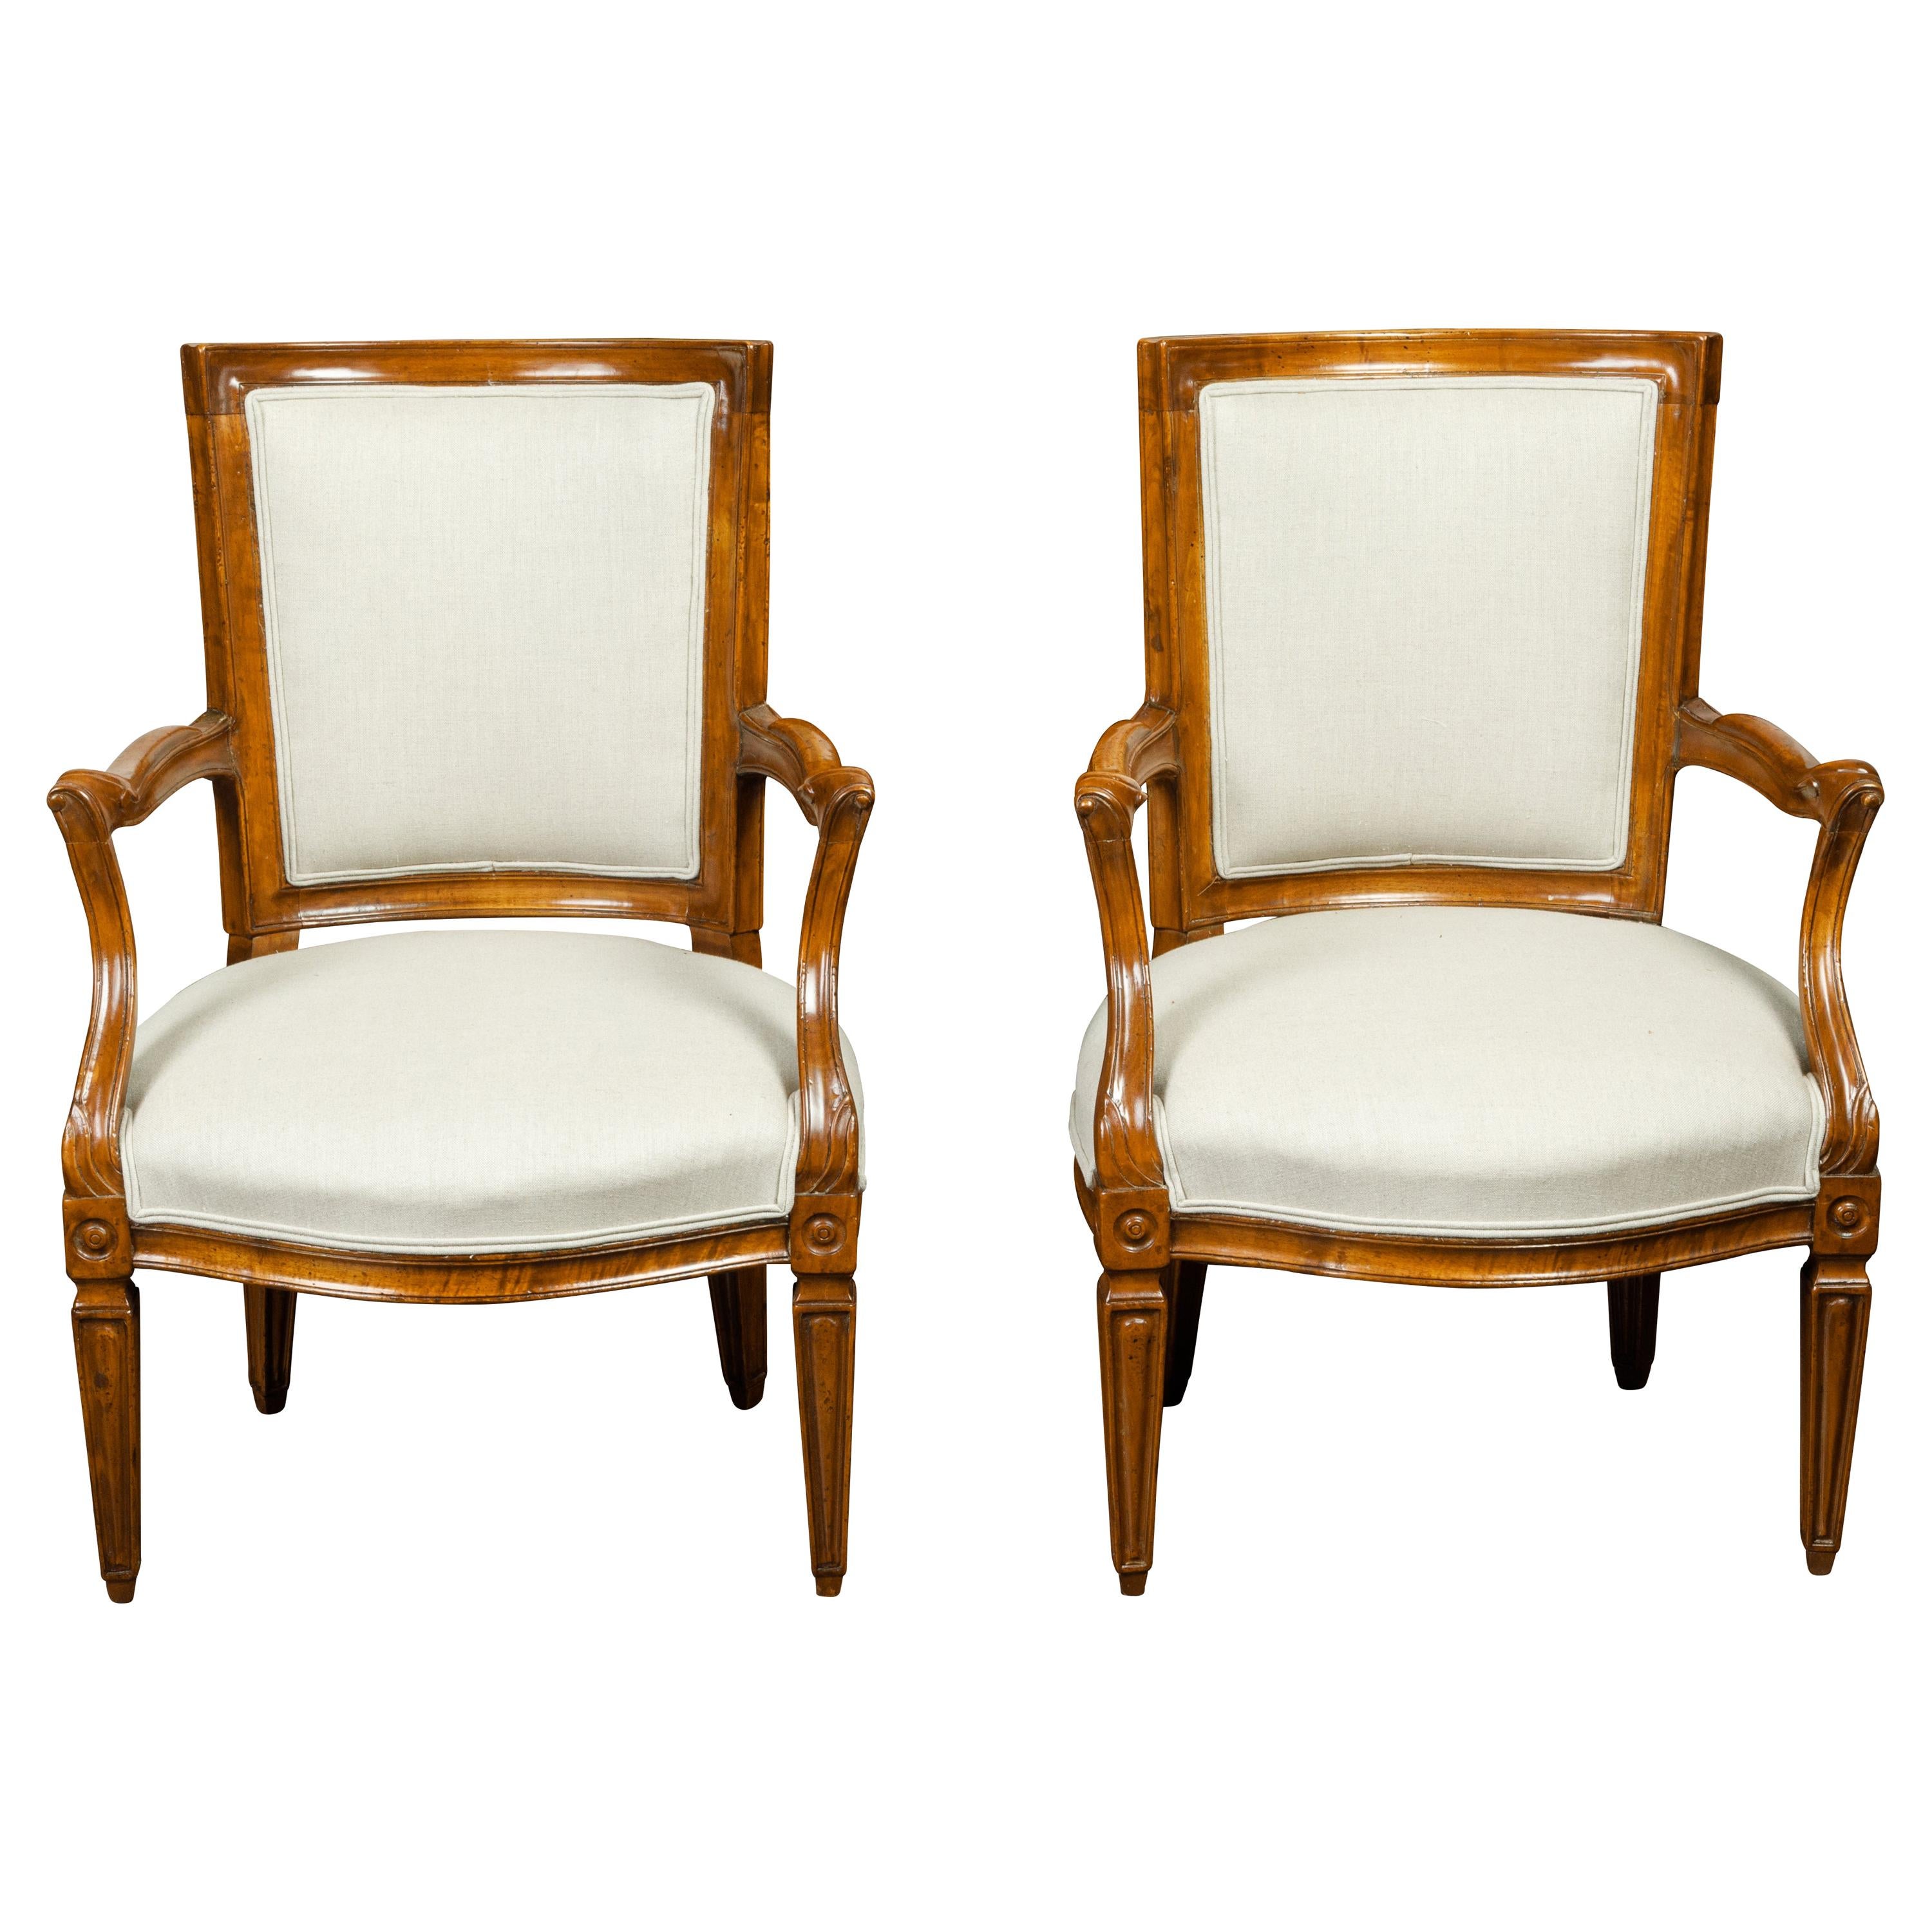 Pair of Italian 1860s Walnut Armchairs with Tapered Legs and New Upholstery For Sale